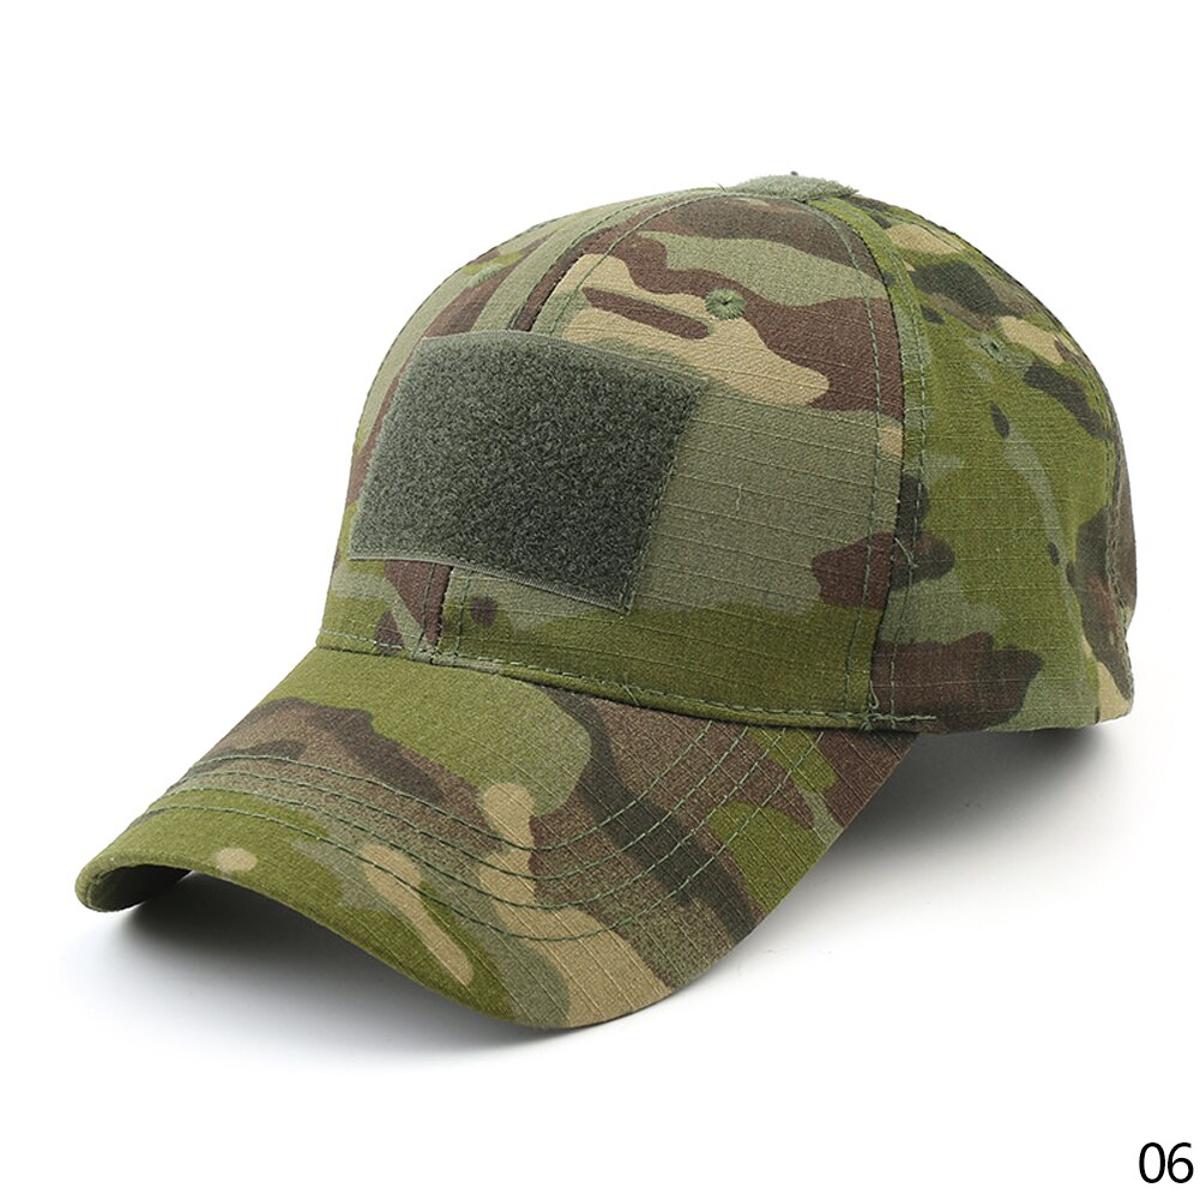 Camo Cap New Fashion Adjustable Unisex Army Camouflage Casquette